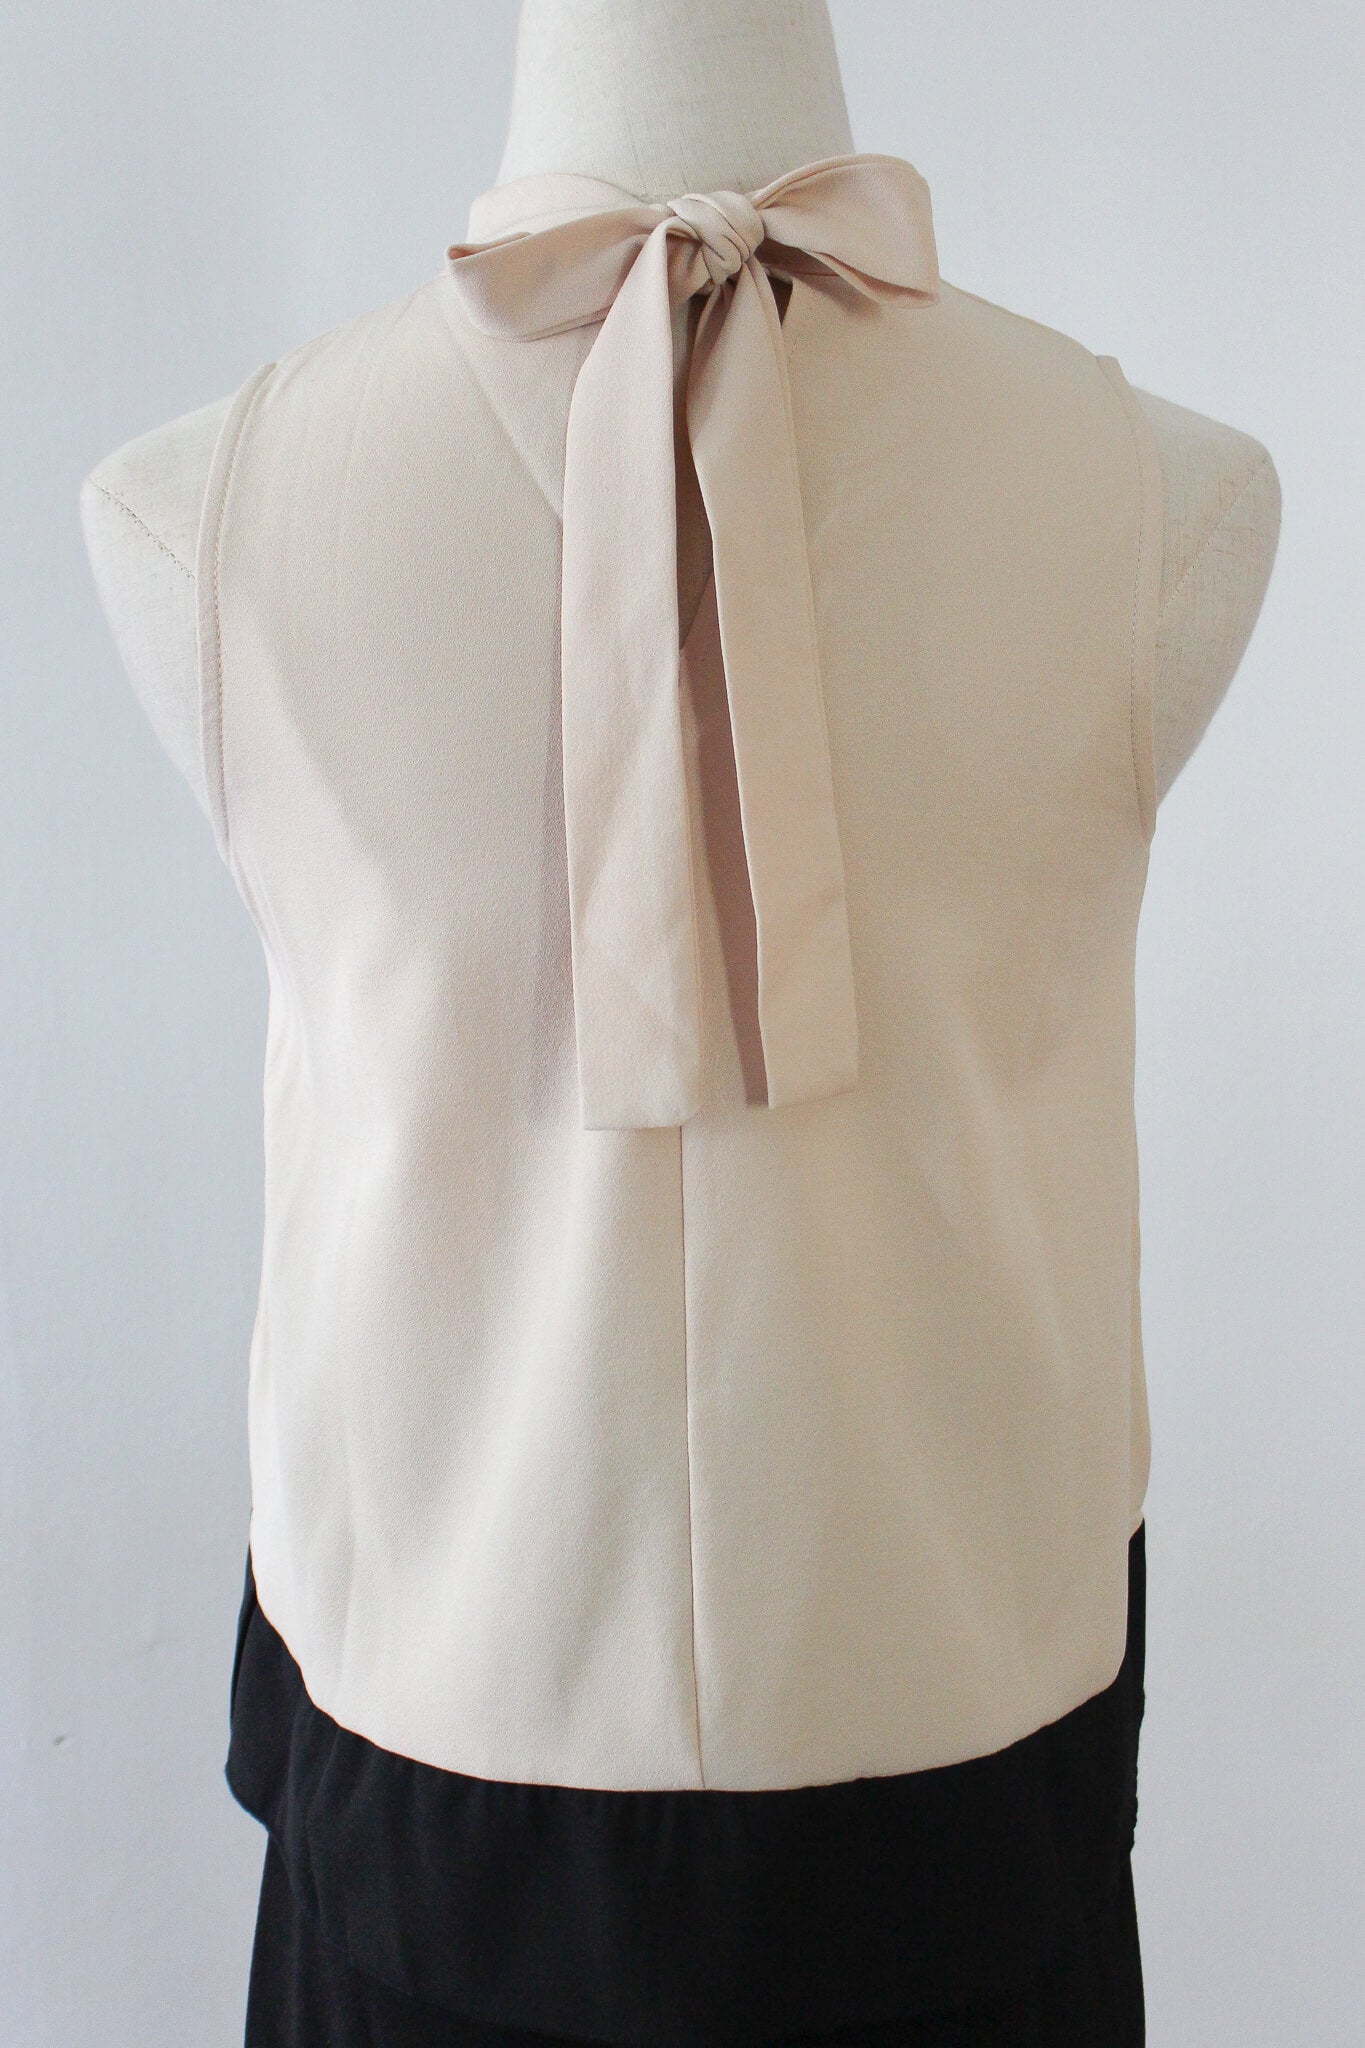 Turtle neck blouse for work wear